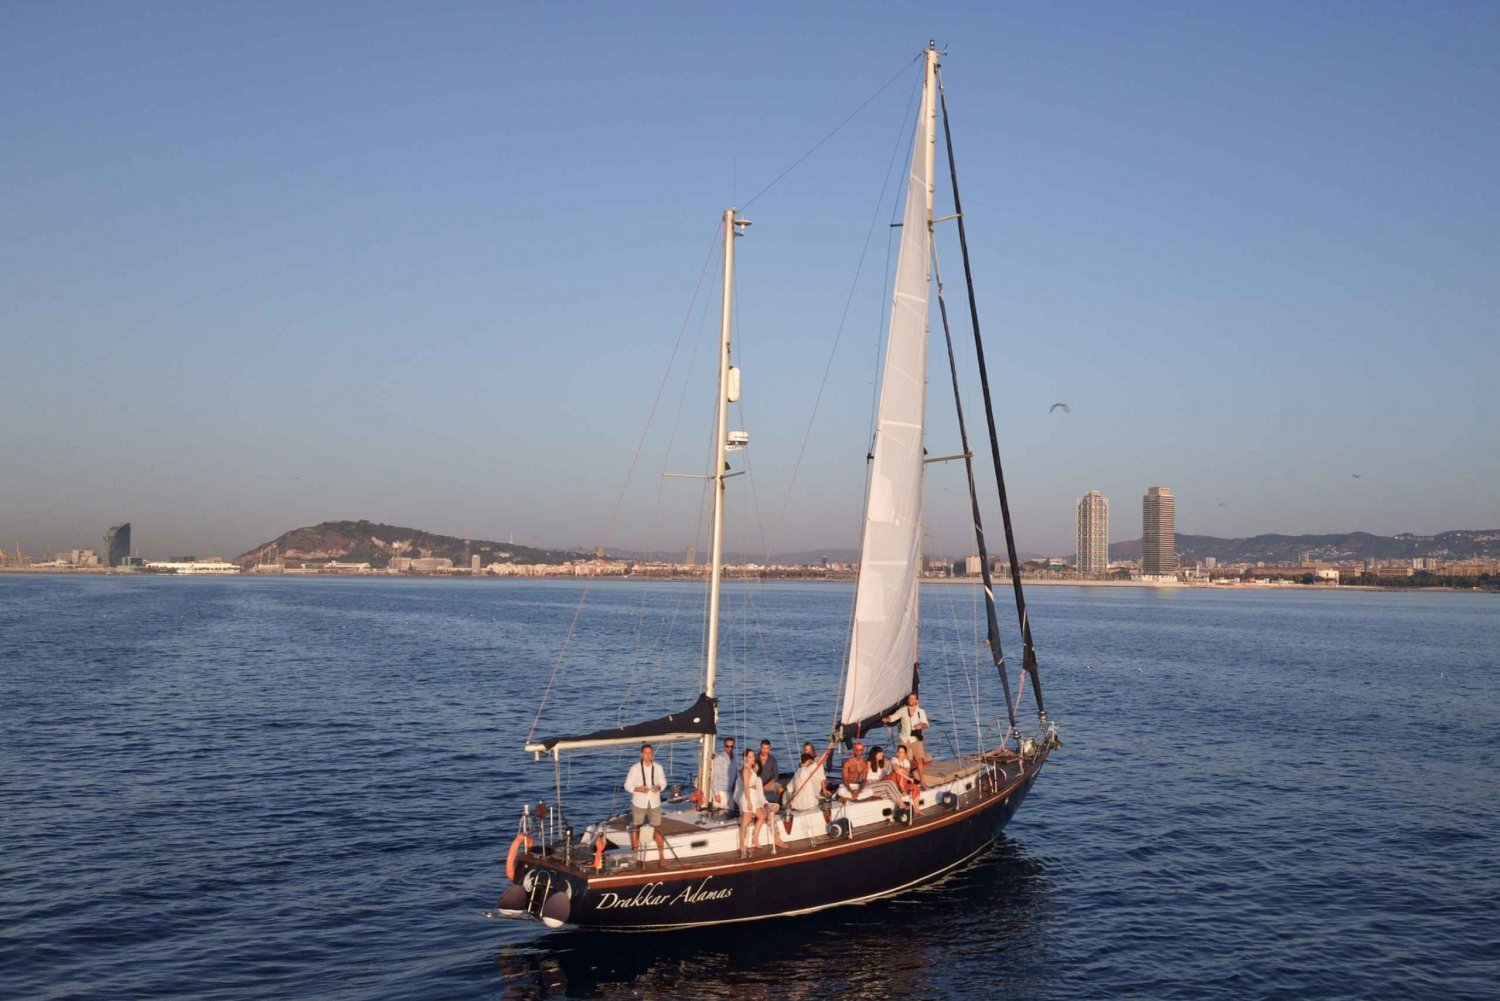 Barcelona: Unique Sailing Experience on a Classic Ketch Boat